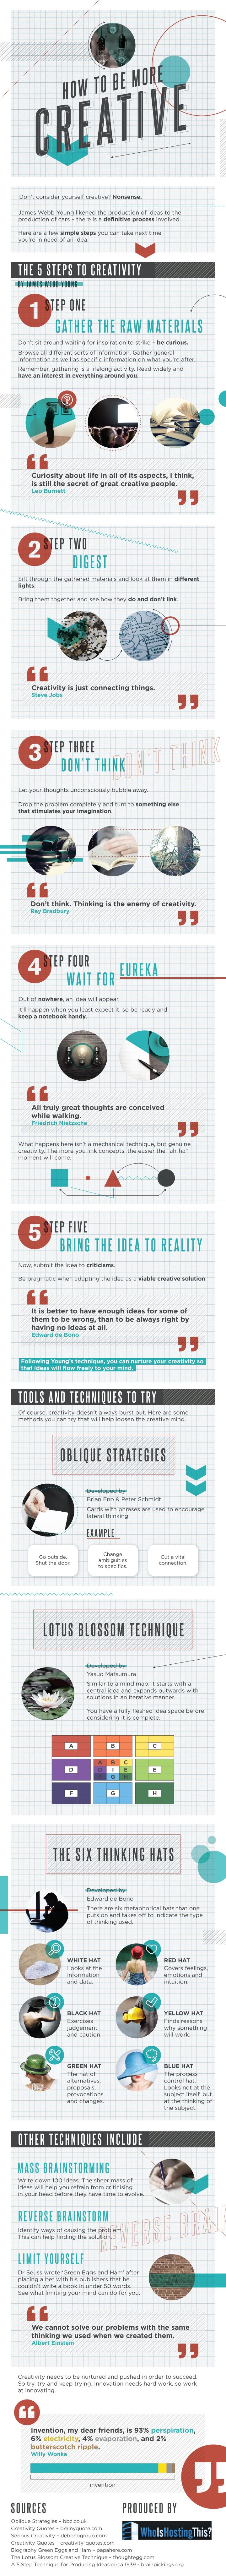 Infographic on How to stay creative